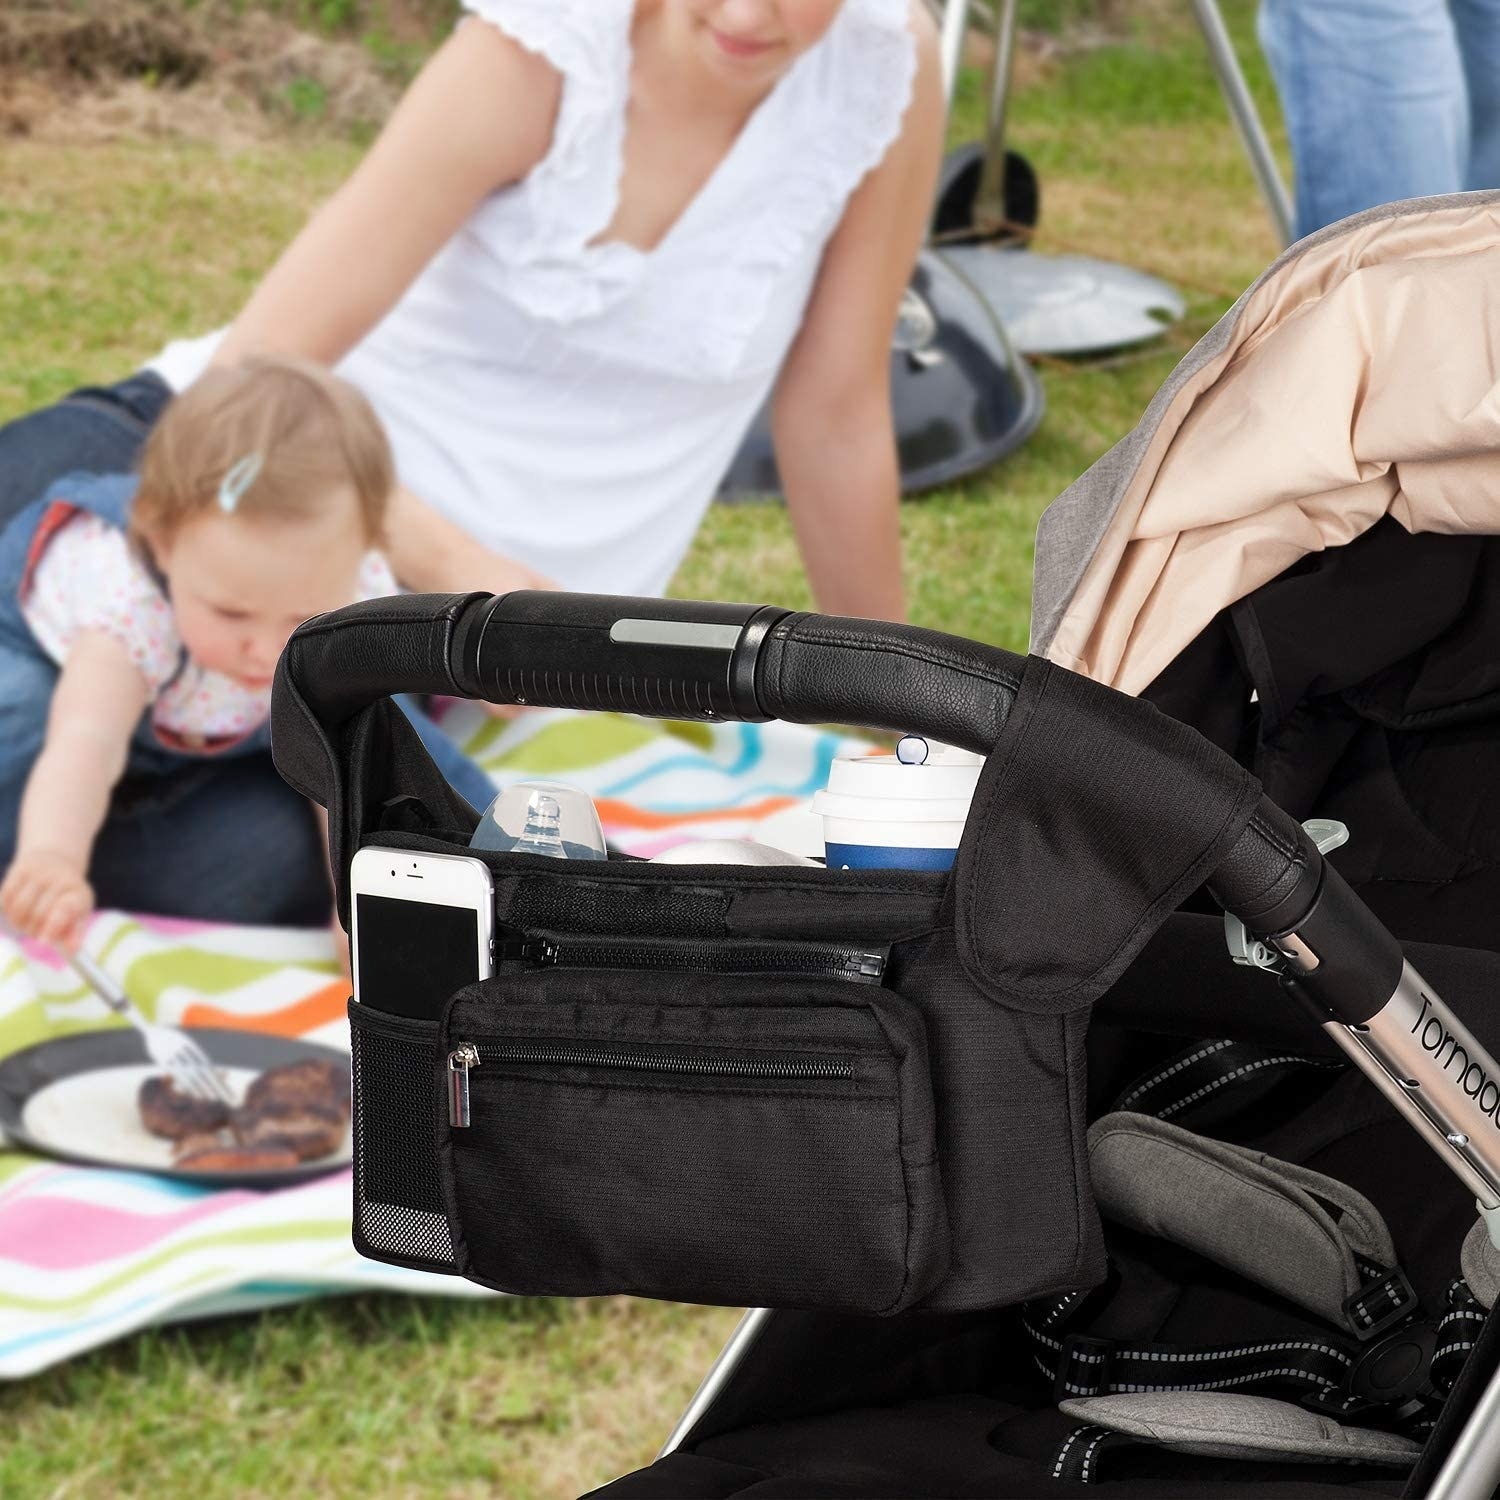 The caddy attached to a stroller with a phone in it